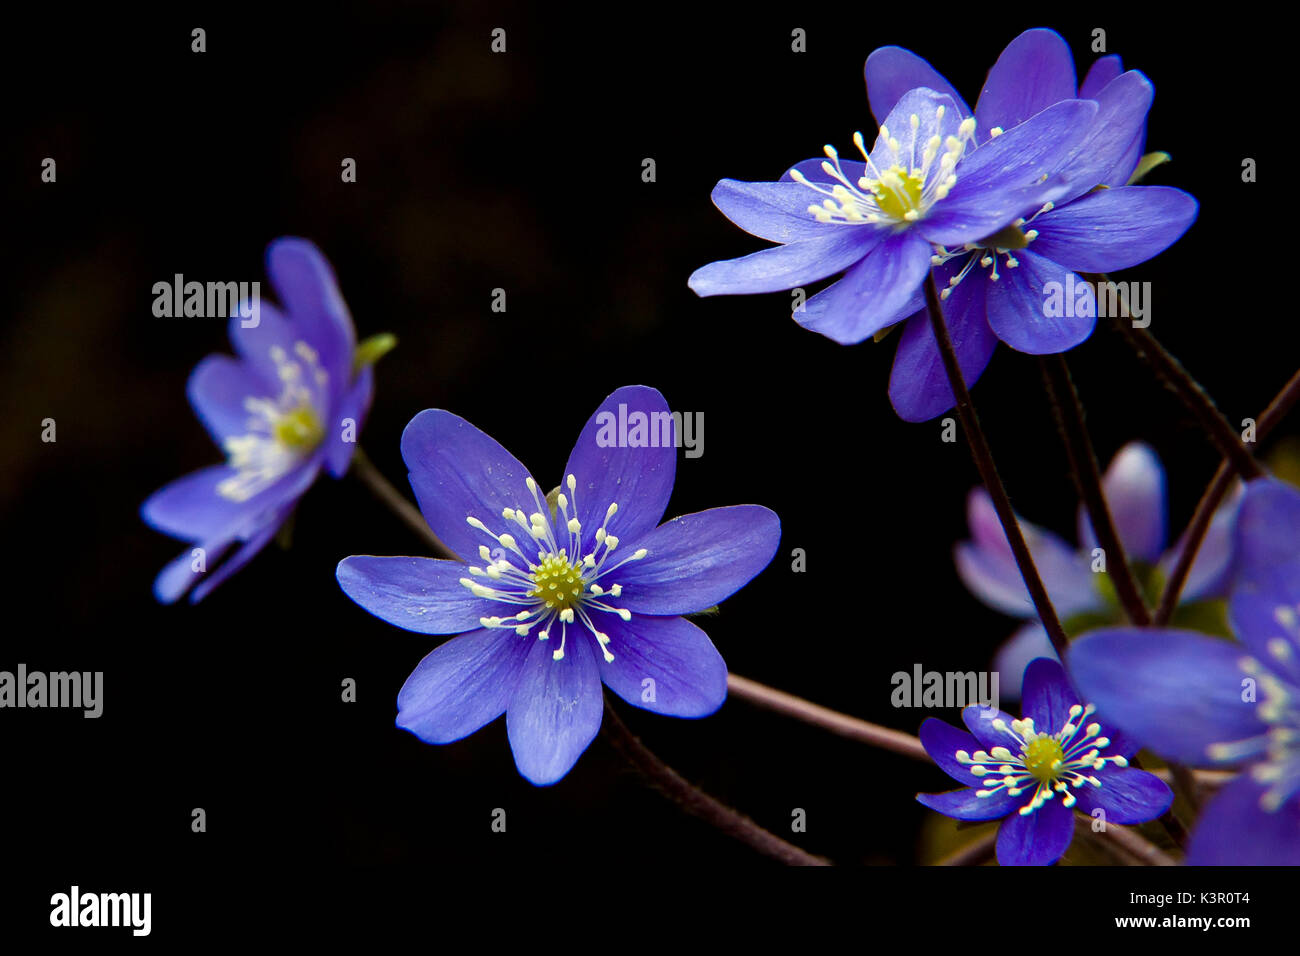 Hepatica, liverleaf, liverwort, is a genus of herbaceous perennials in the buttercup family, native to central and northern Europe, Asia and eastern North America. Lombardy Italy Europe Stock Photo